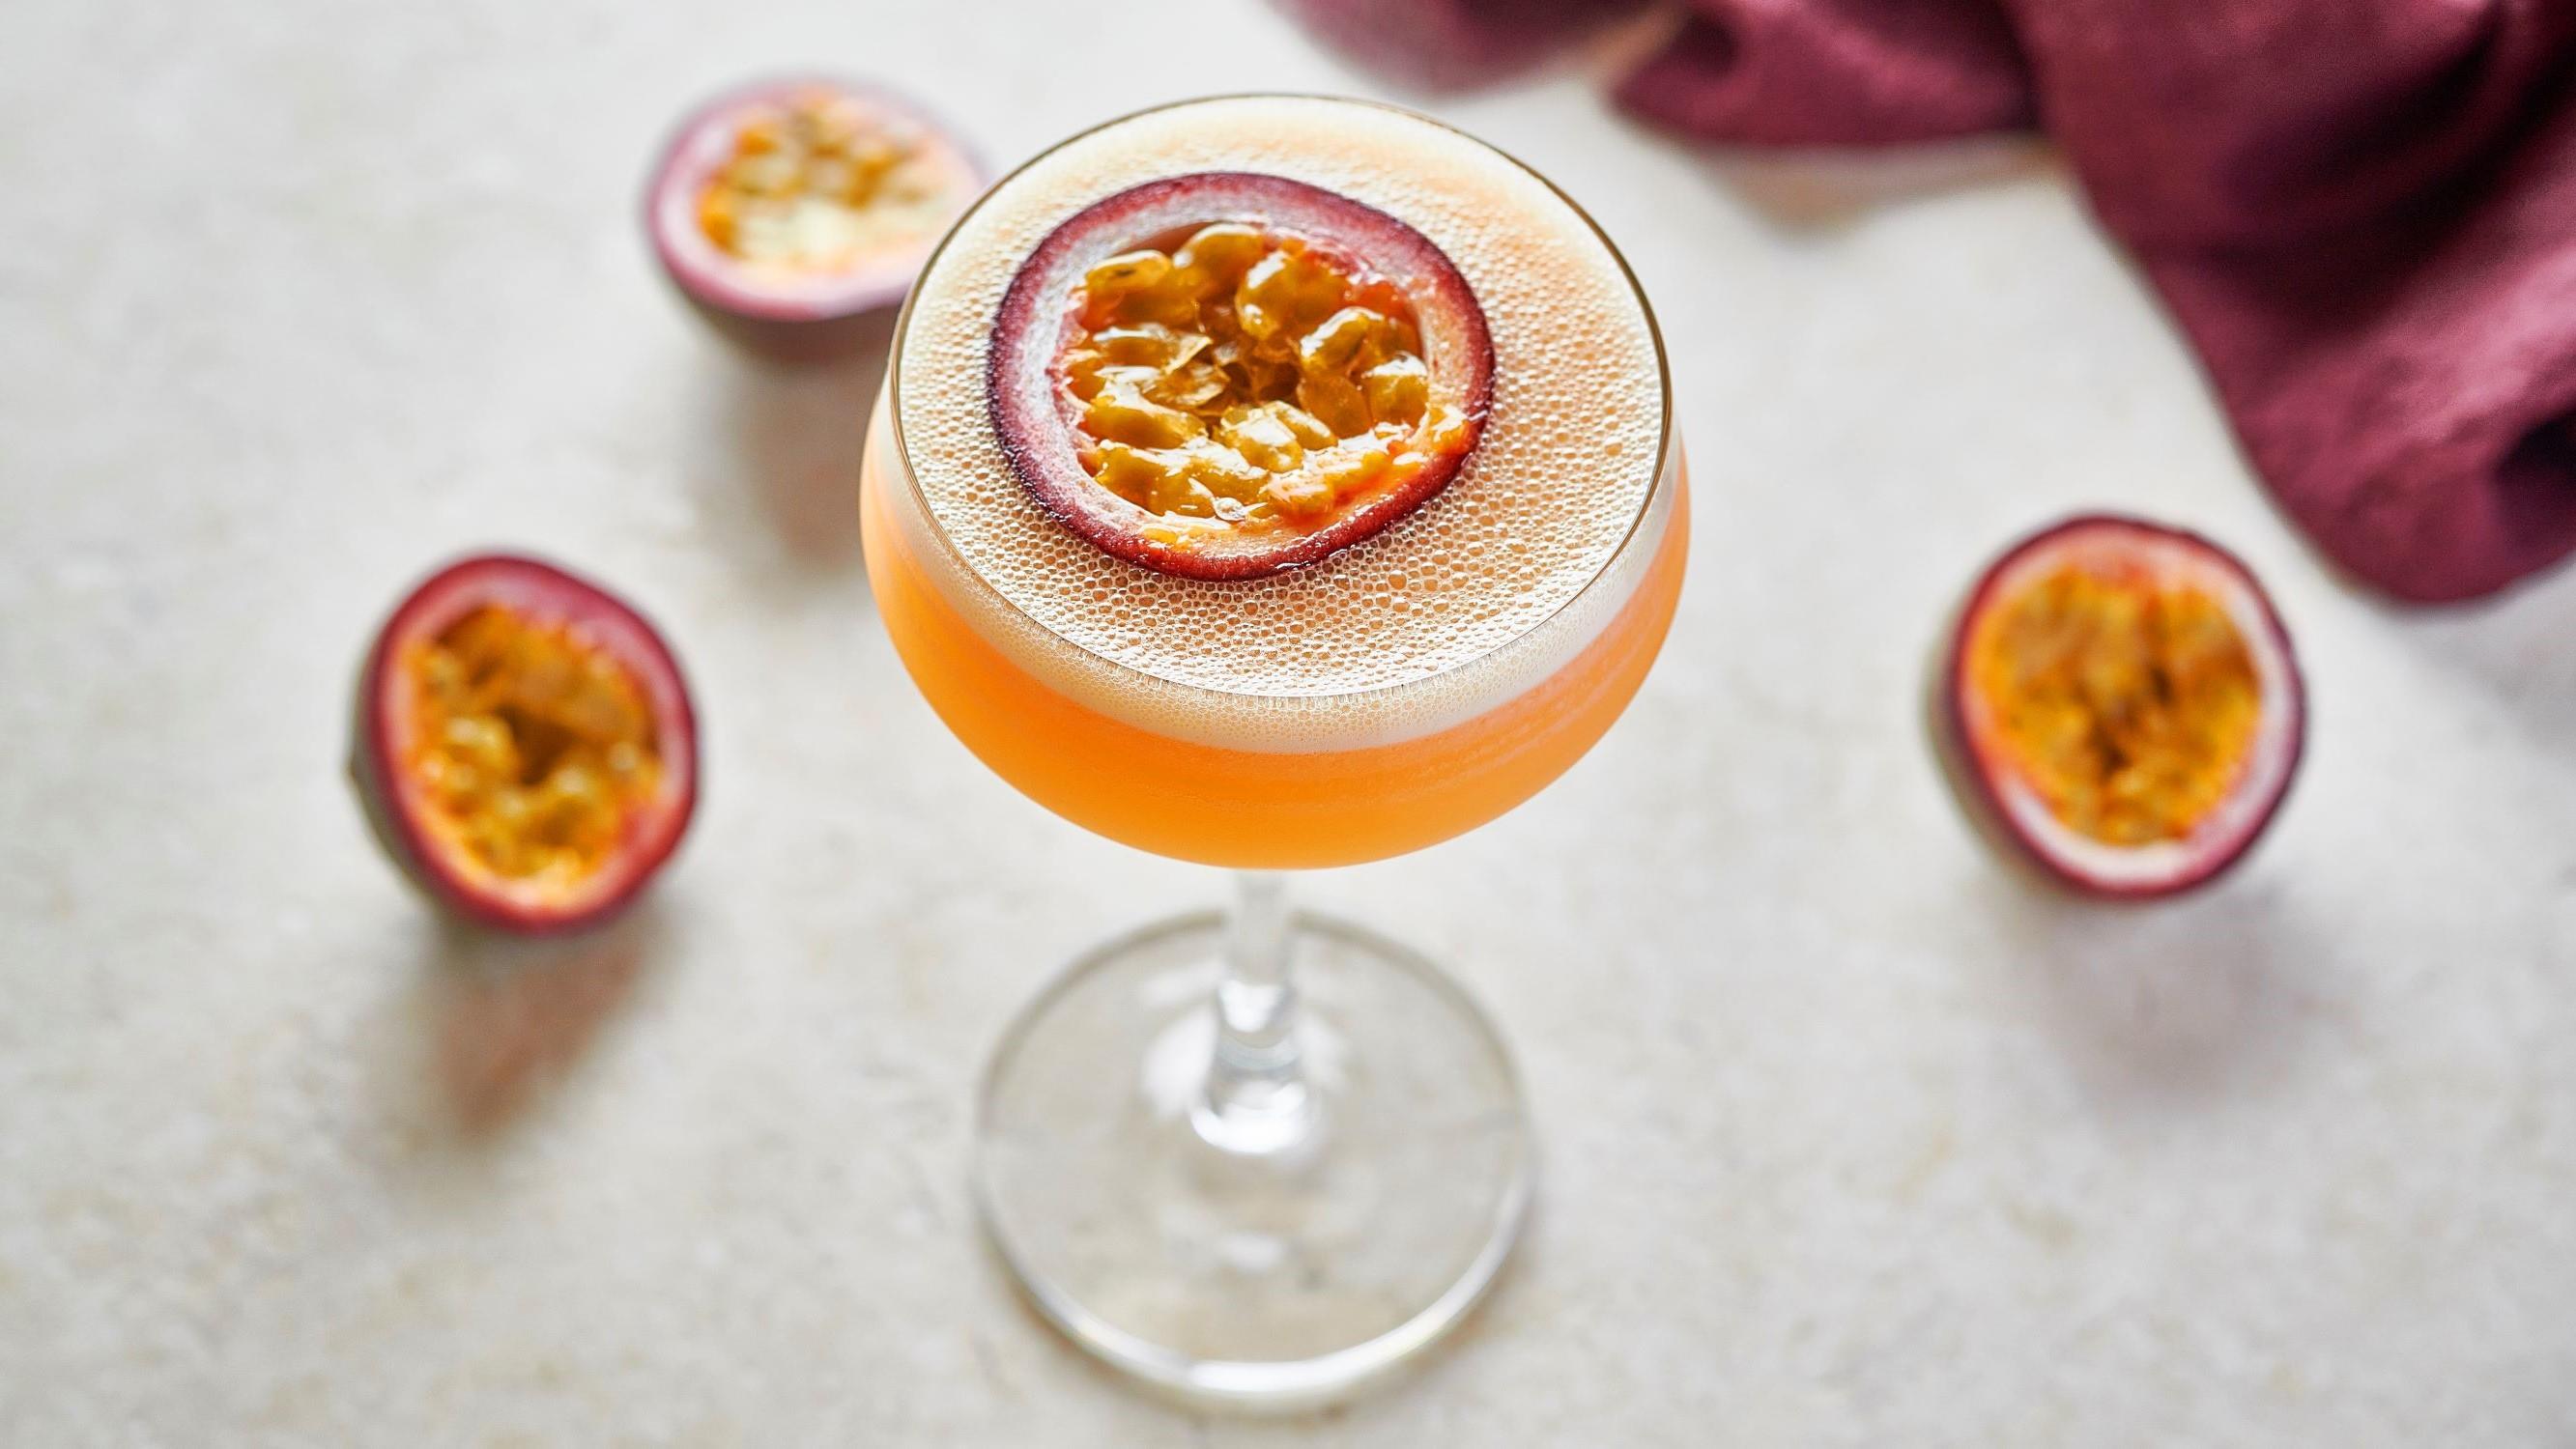 8-facts-about-world-passion-fruit-martini-day-may-28th